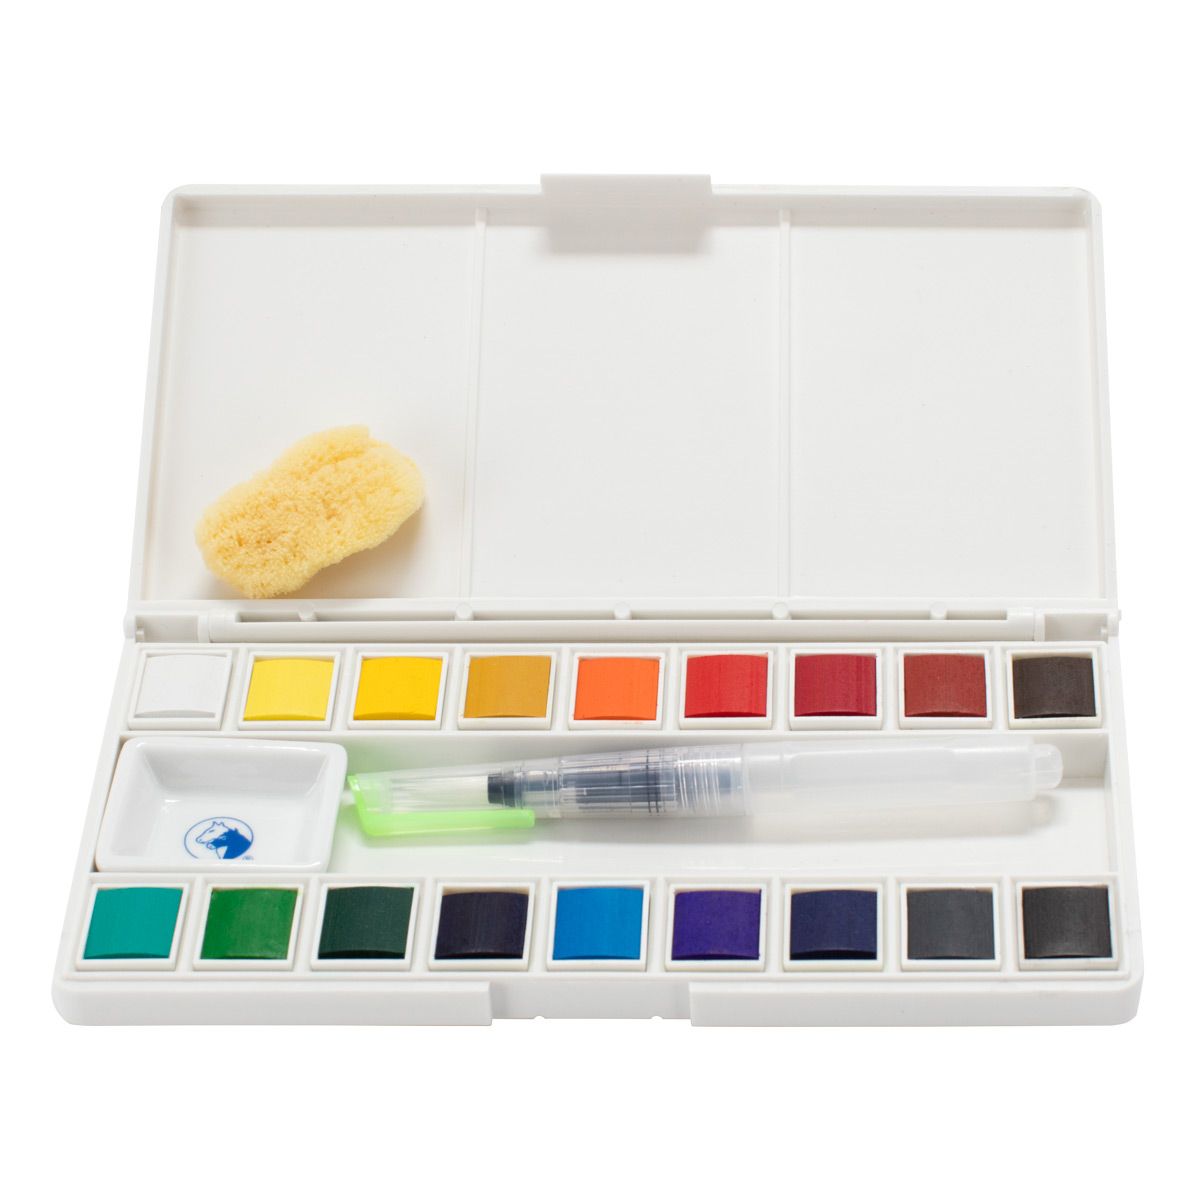 High quality palette box with mixing area